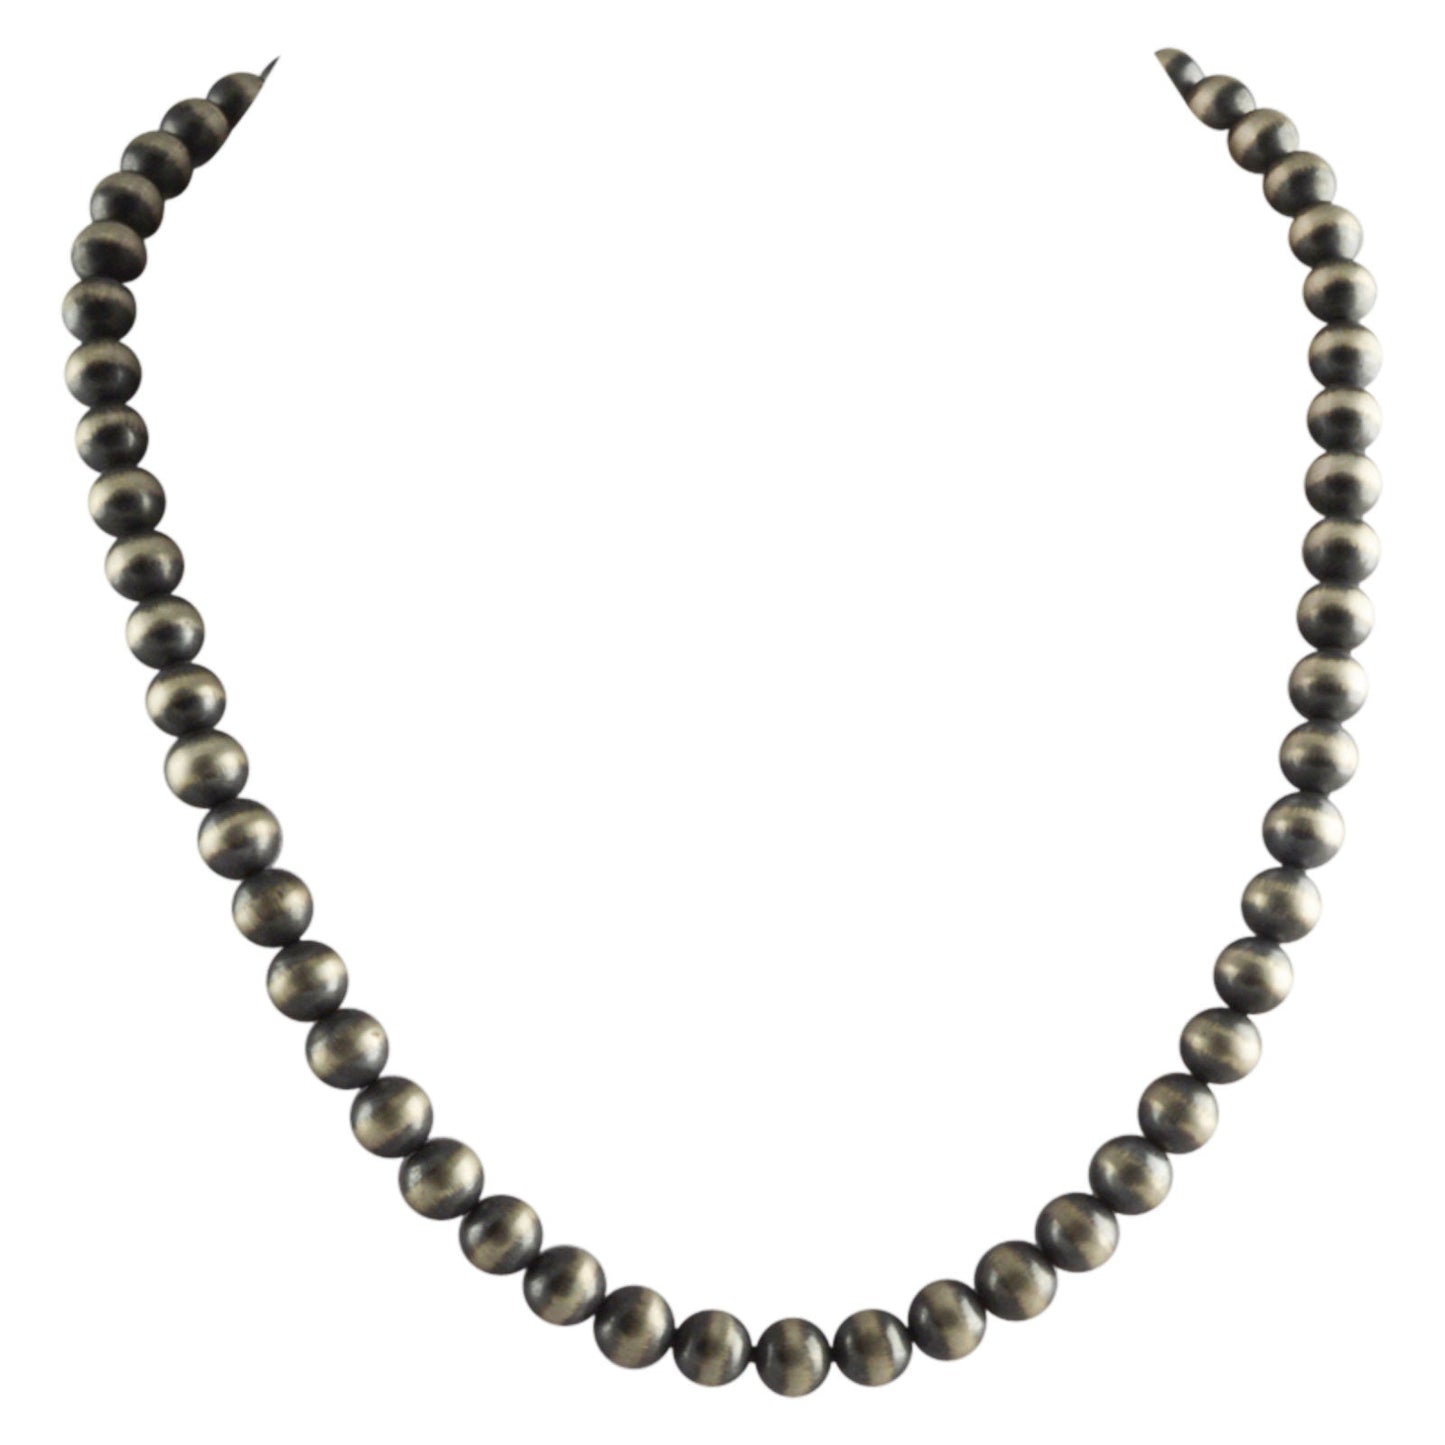 Sterling Silver Navajo Pearl 14mm Oxidize Round Bead Necklace. Available from 16" to 60"